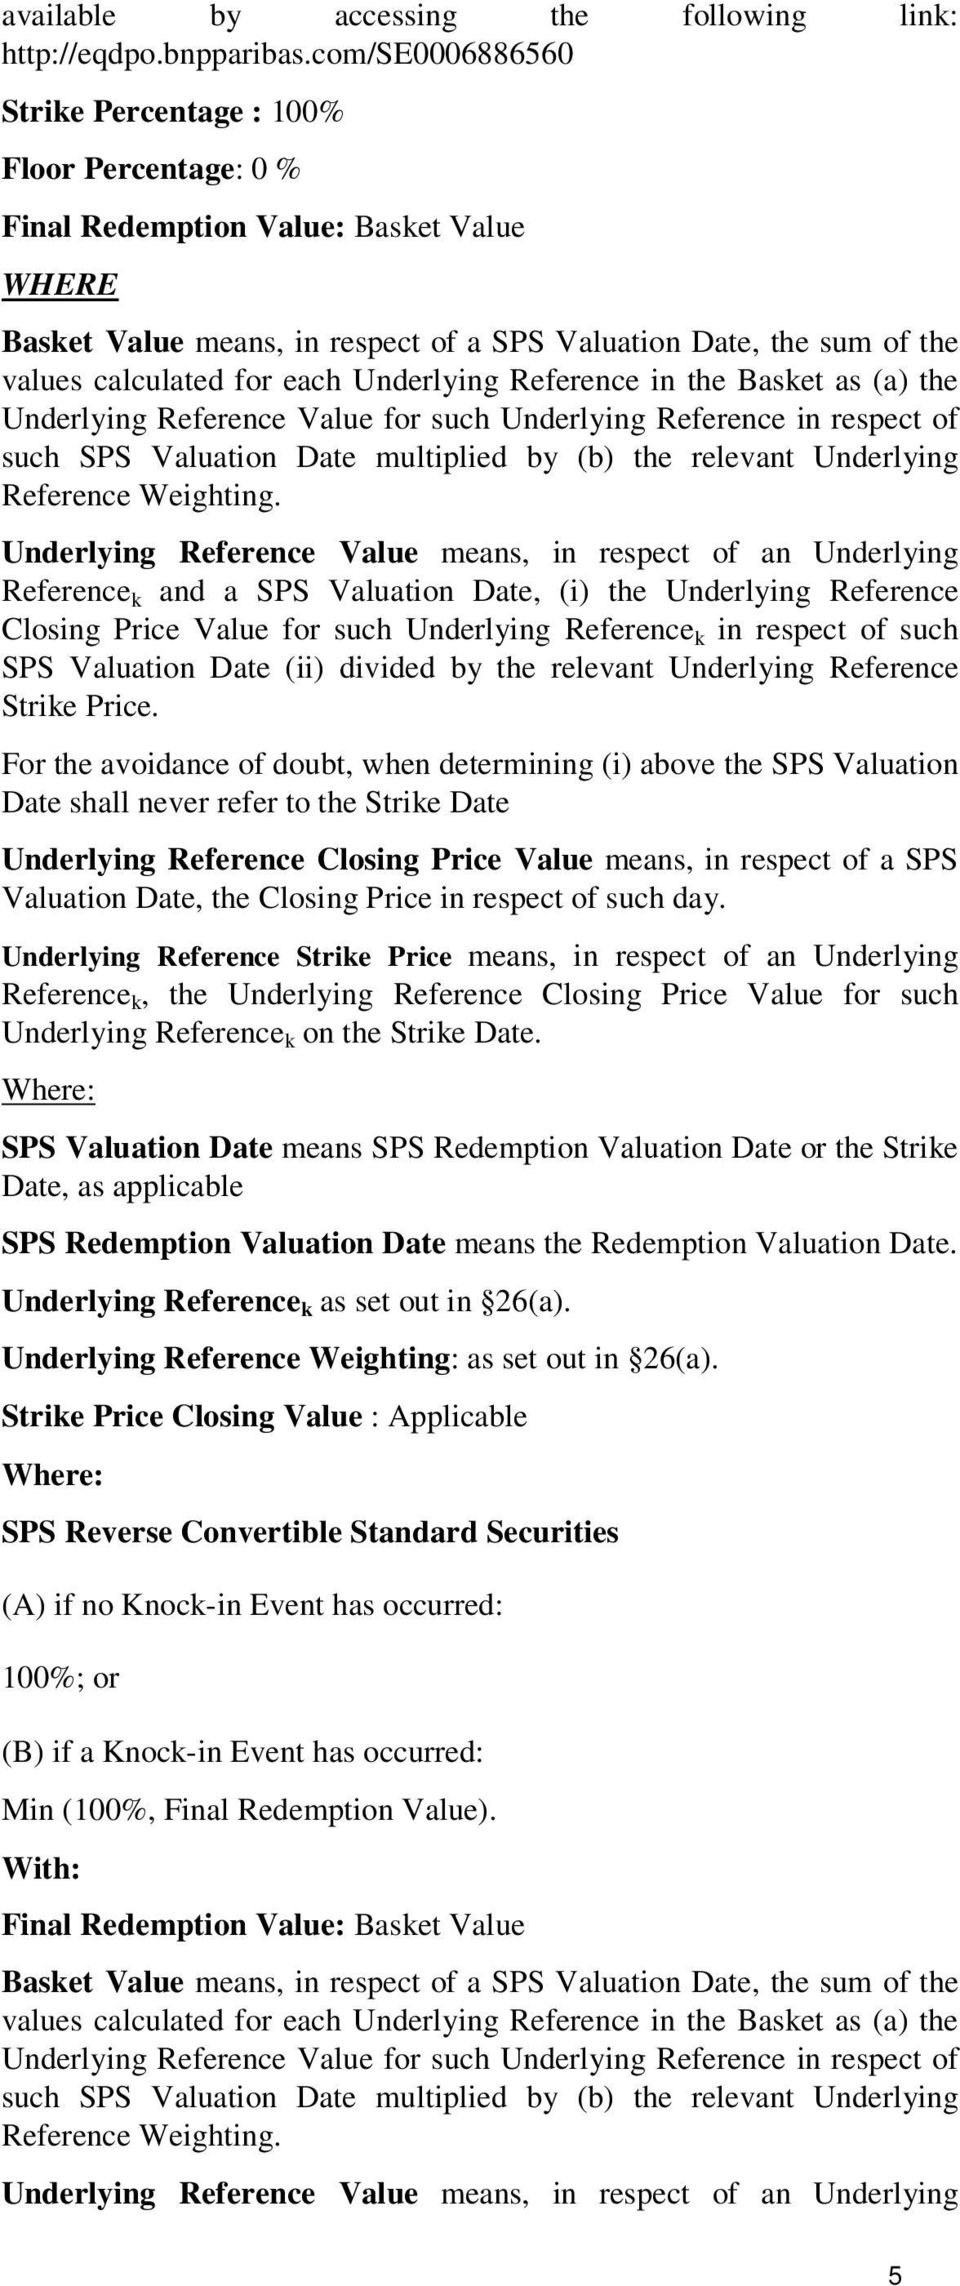 each Underlying Reference in the Basket as (a) the Underlying Reference Value for such Underlying Reference in respect of such SPS Valuation Date multiplied by (b) the relevant Underlying Reference